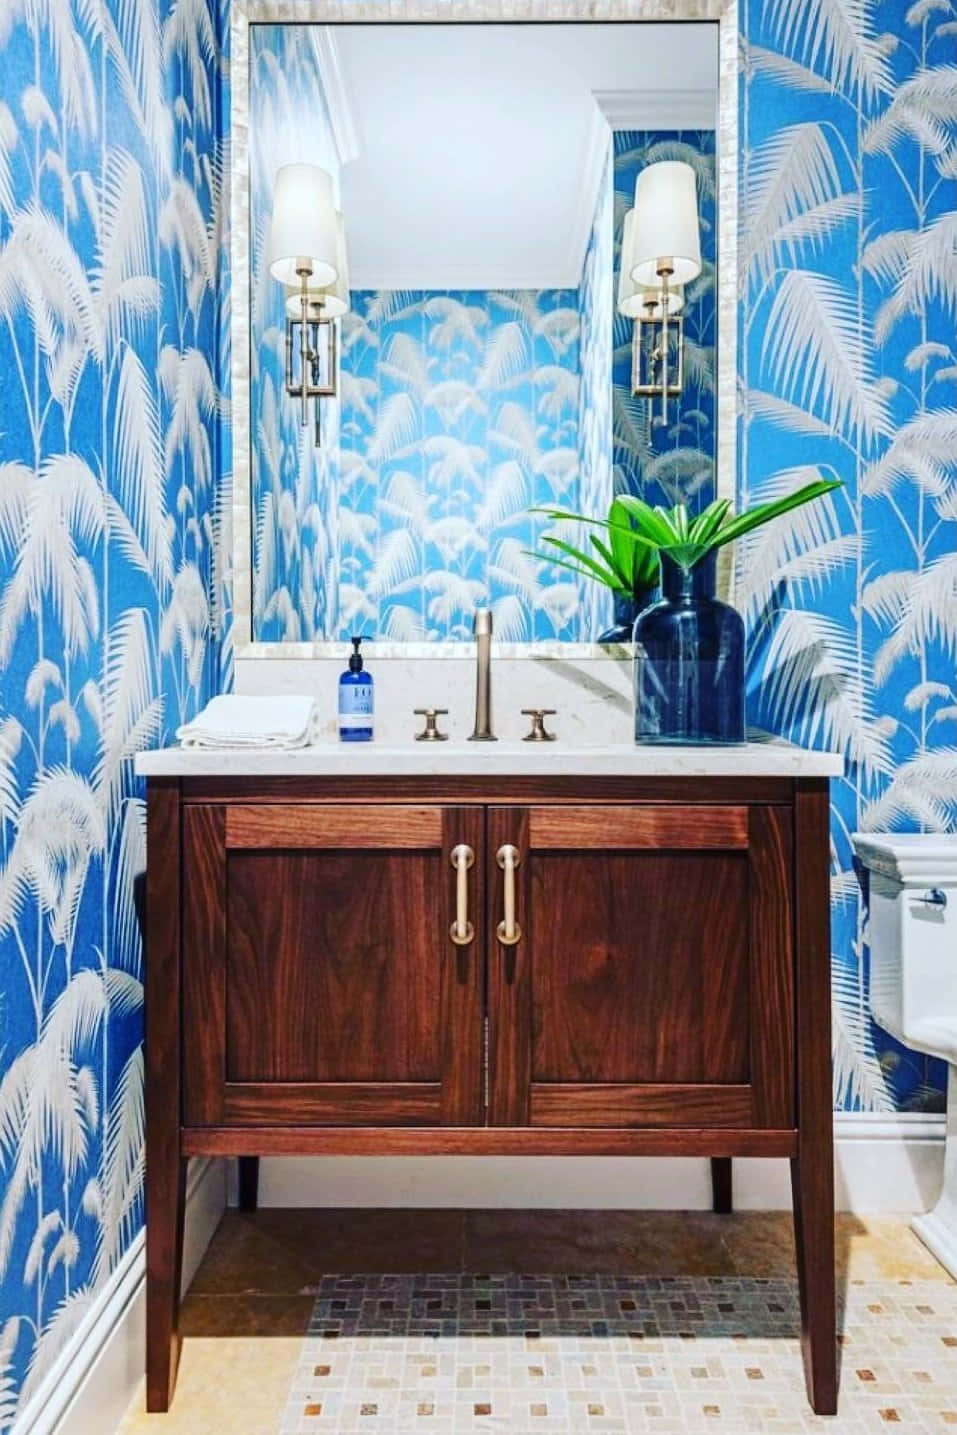 A Sumptuous Blue And White Bathroom With Feather Patterned Wall Wallpaper